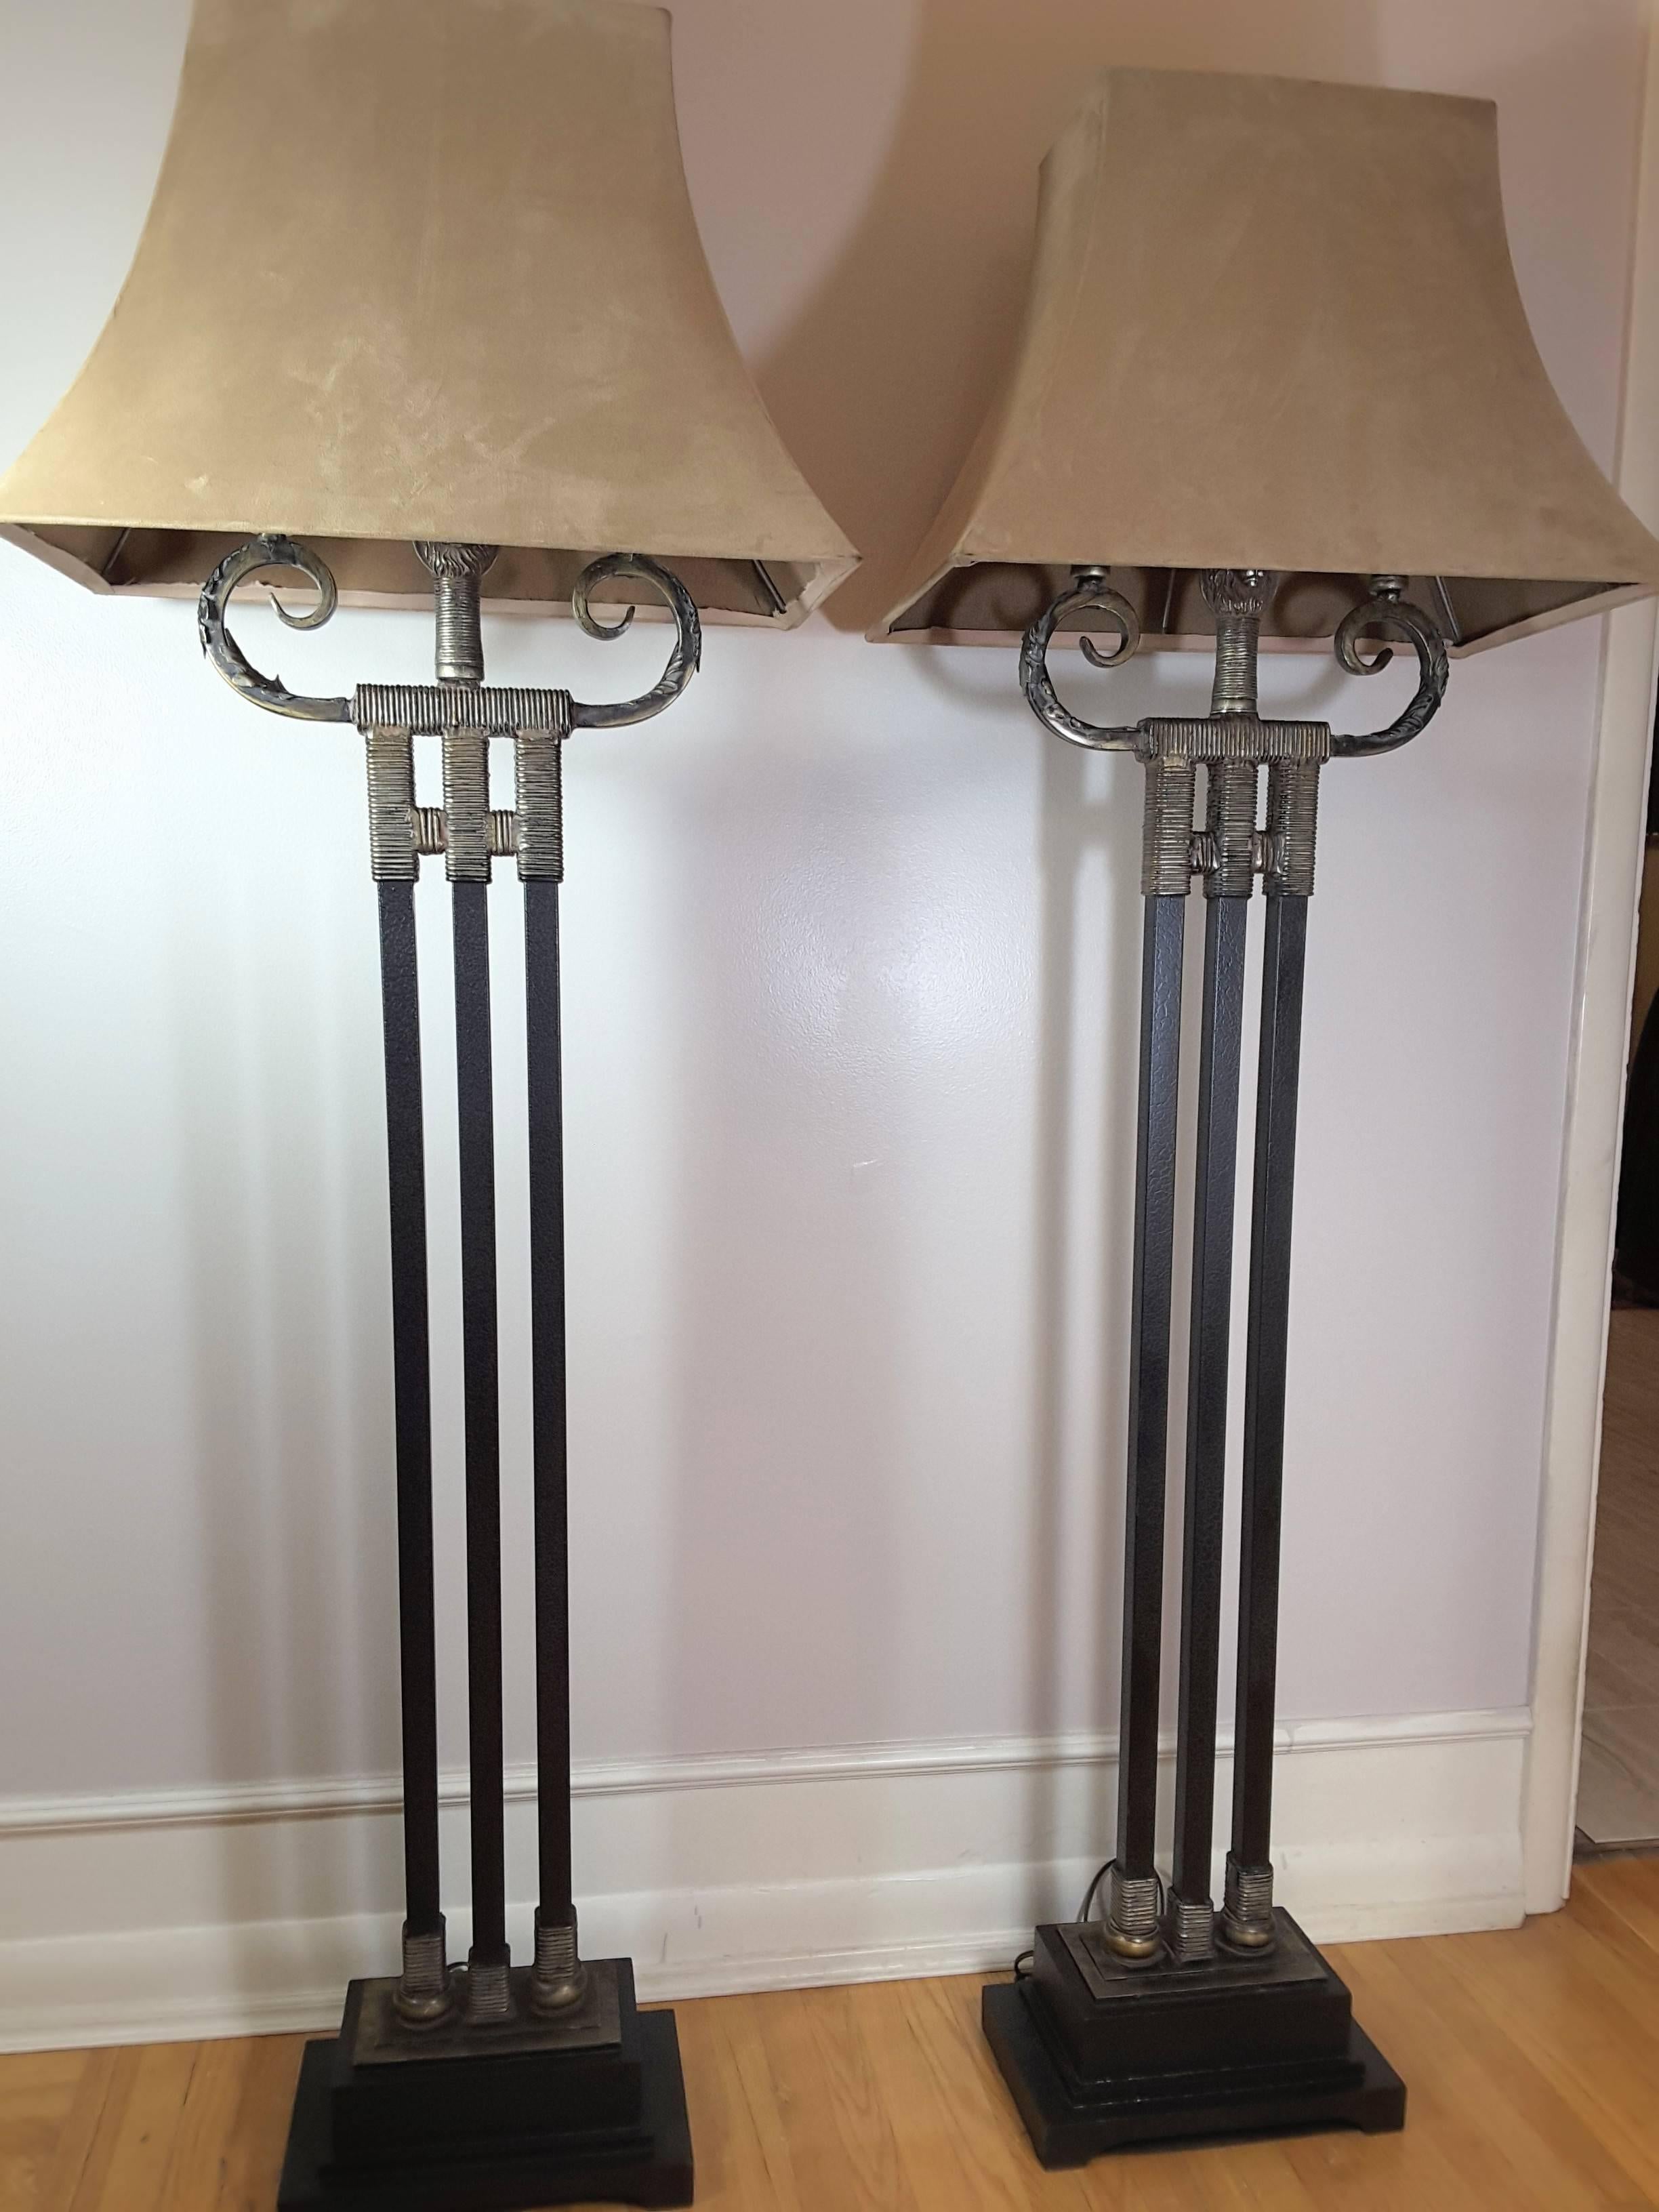 A majestic lions head Mid-Century Modern pair of floor lamps, three black alligator finish columns, scrolled top with a double sided lions head in the centre, on a plinth base. The lamps have new sockets and wiring. The columns are wire wrapped on